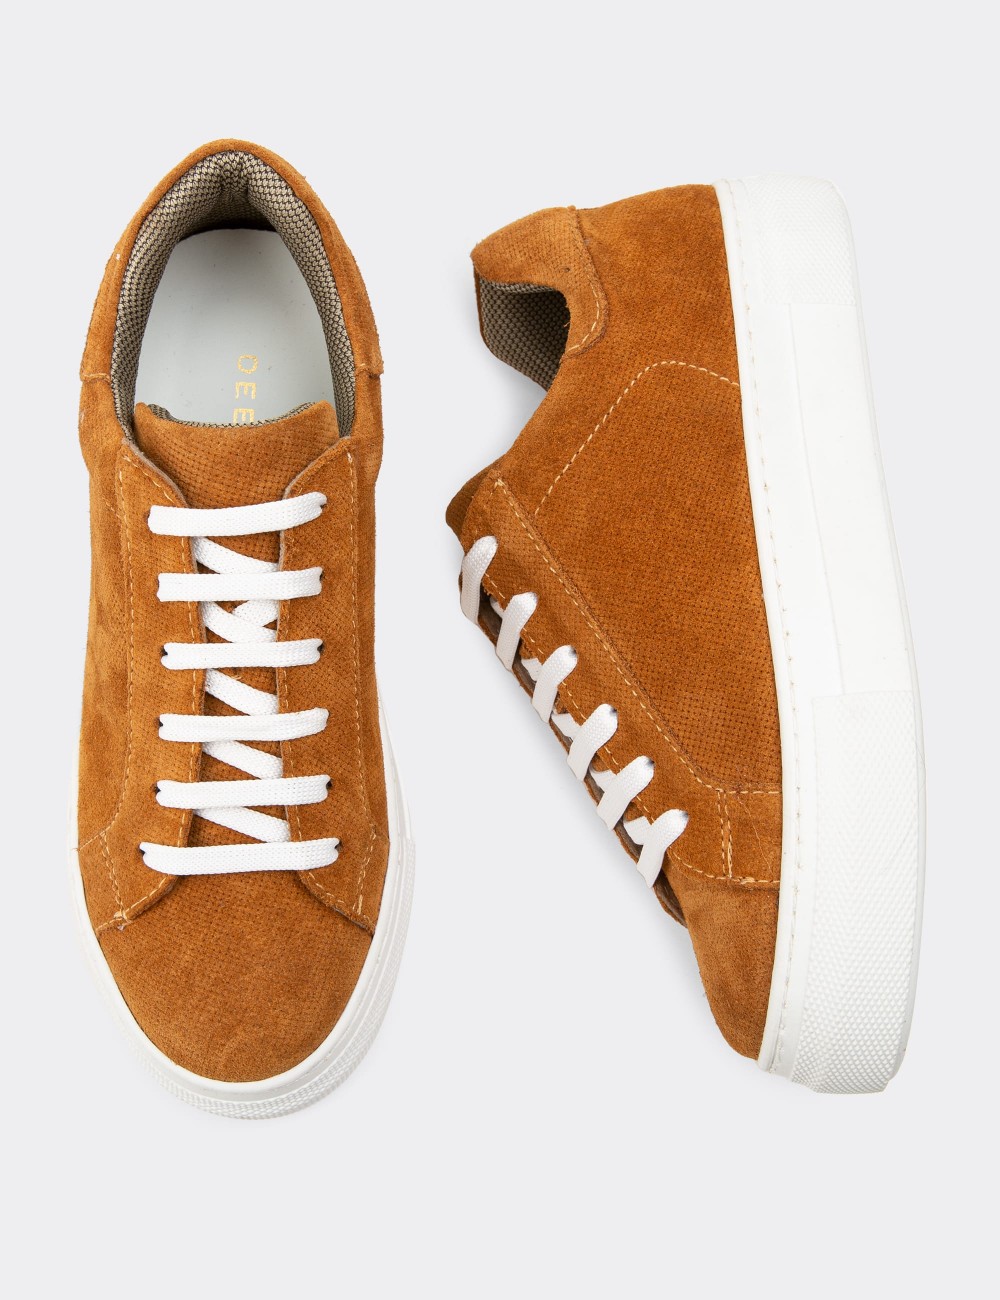 Tan Suede Leather Sneakers - Z1681ZTBAC06